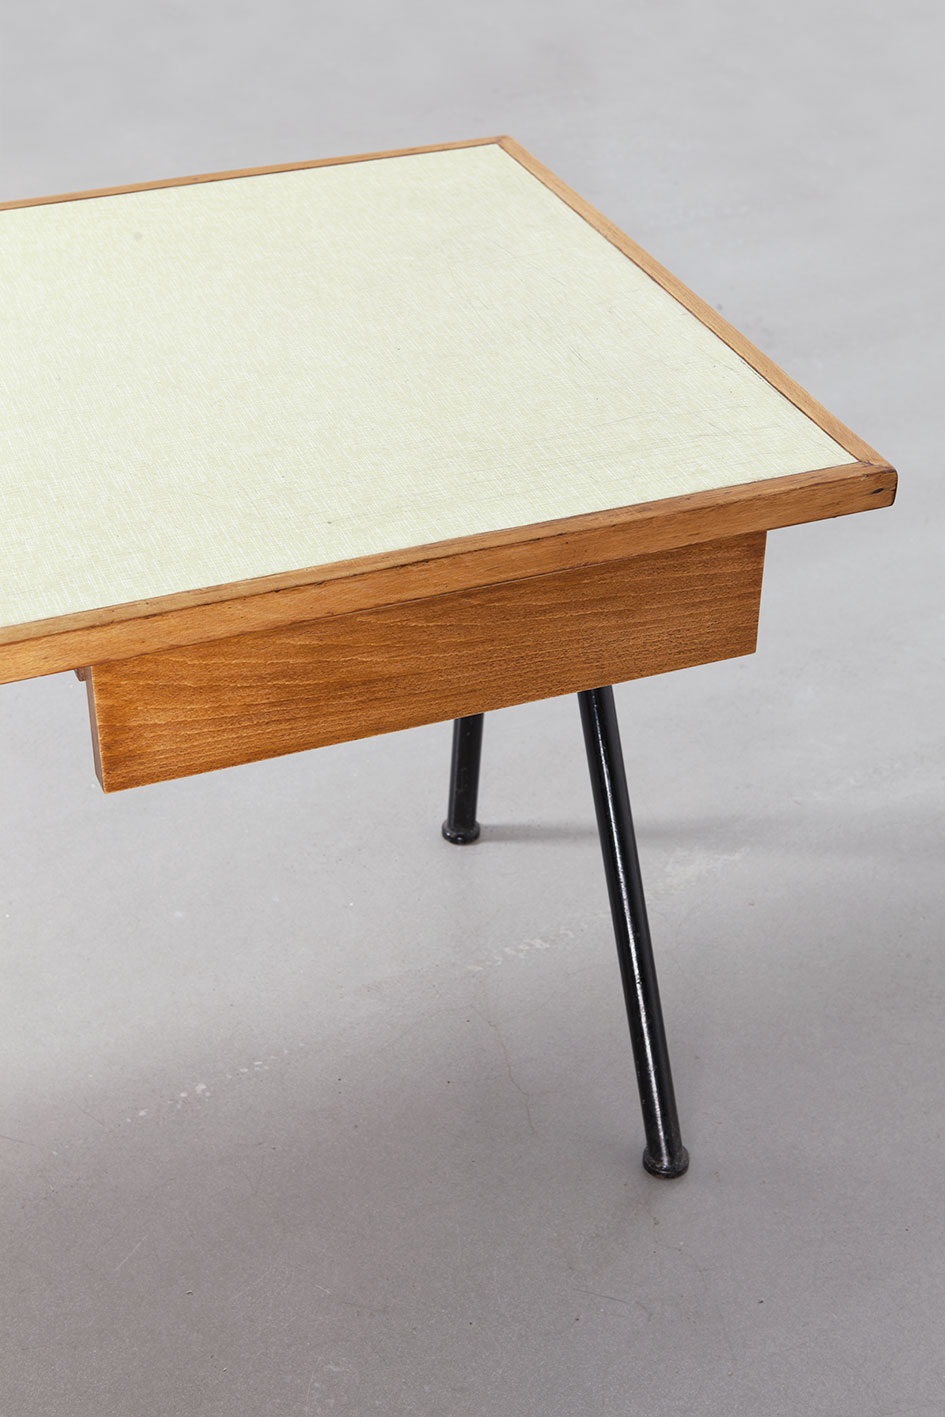 Desk with Compas base, variant with tube legs and desk top in laminated wood, 1955.